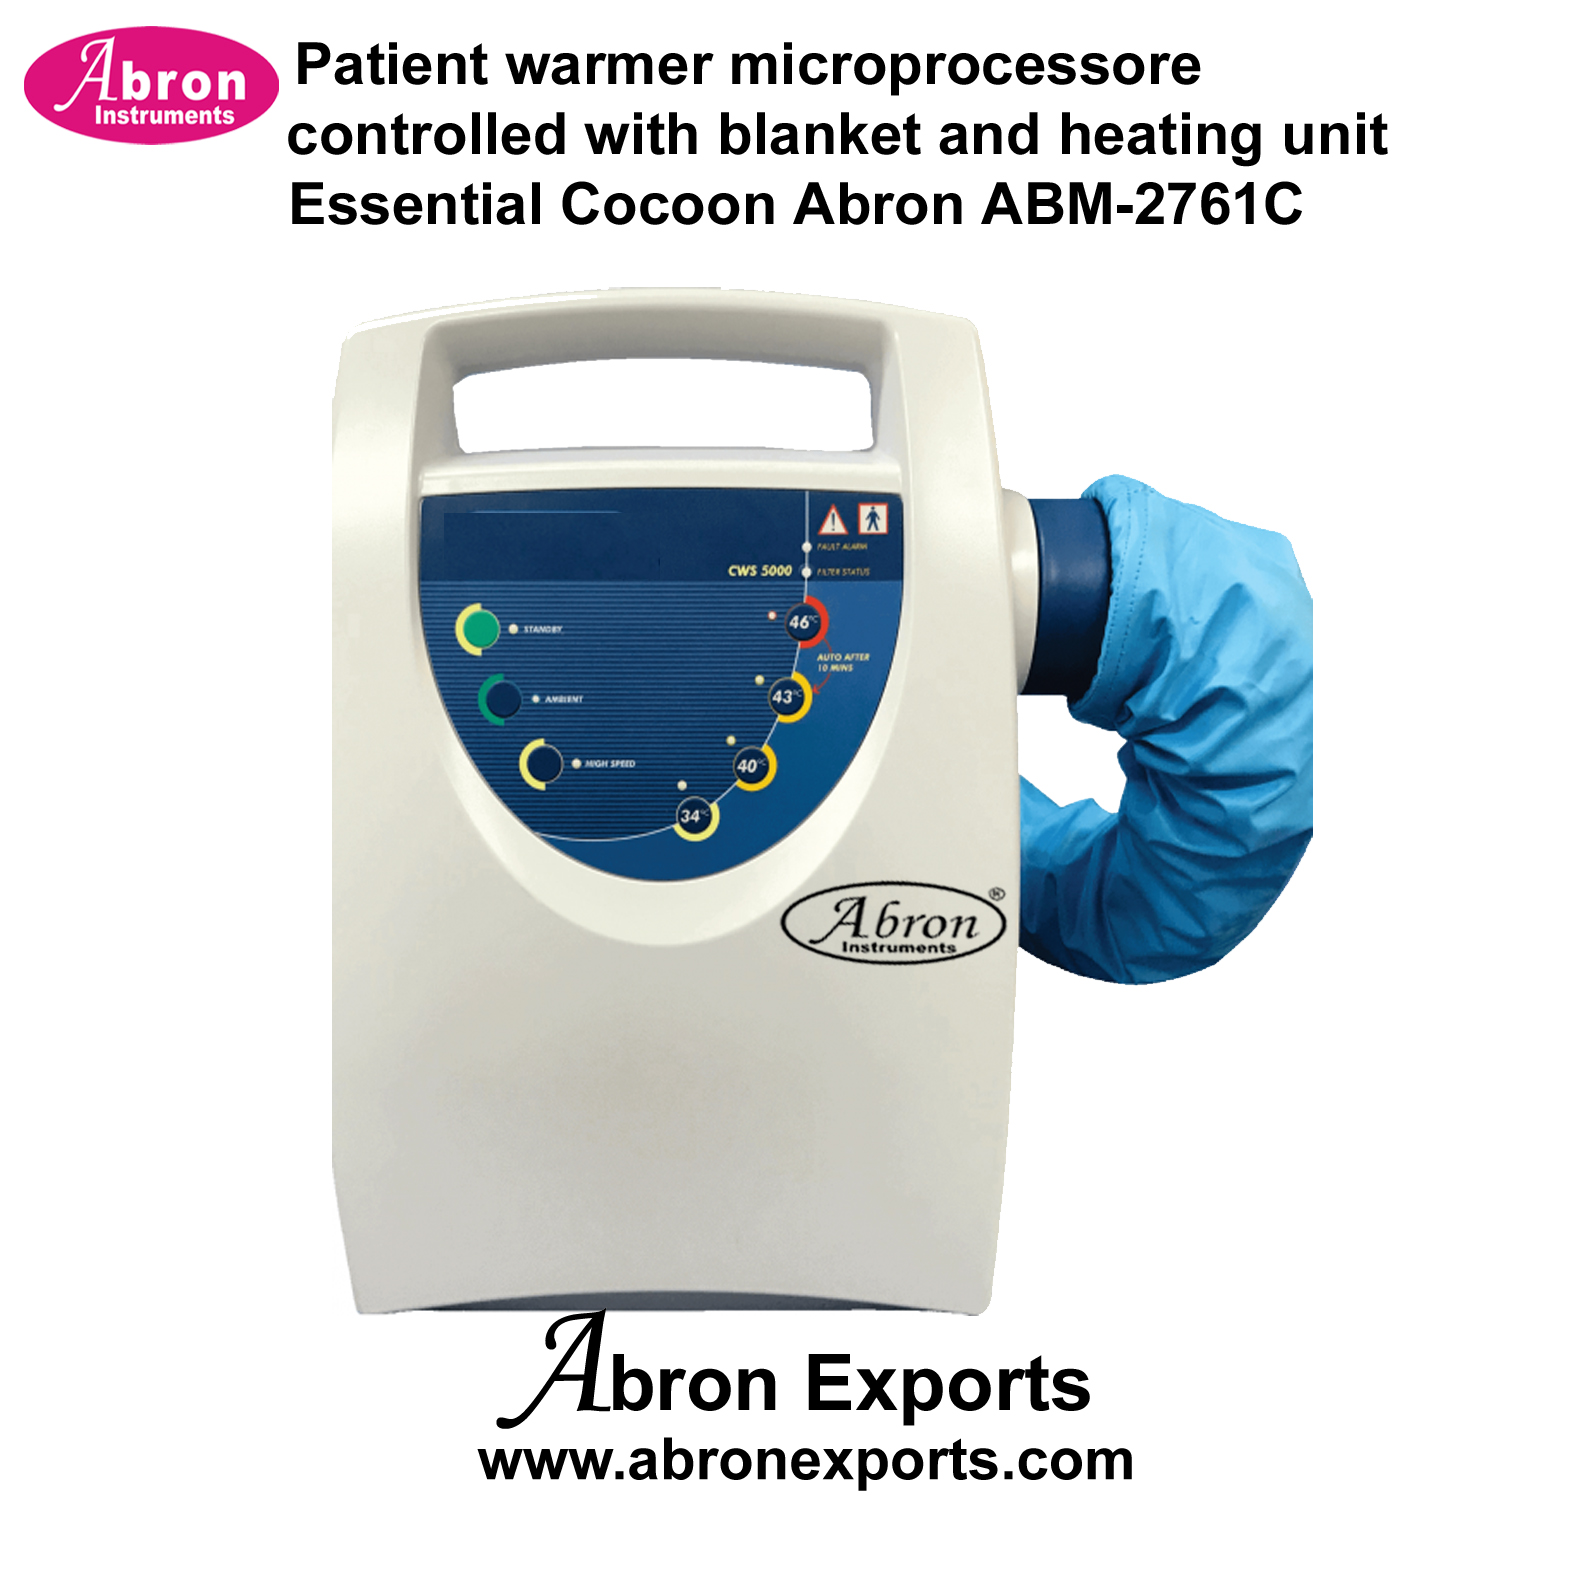 Patient warmer microprocessore controlled with blanket and heating unit Essentials Cocoon Abron ABM-2761C 